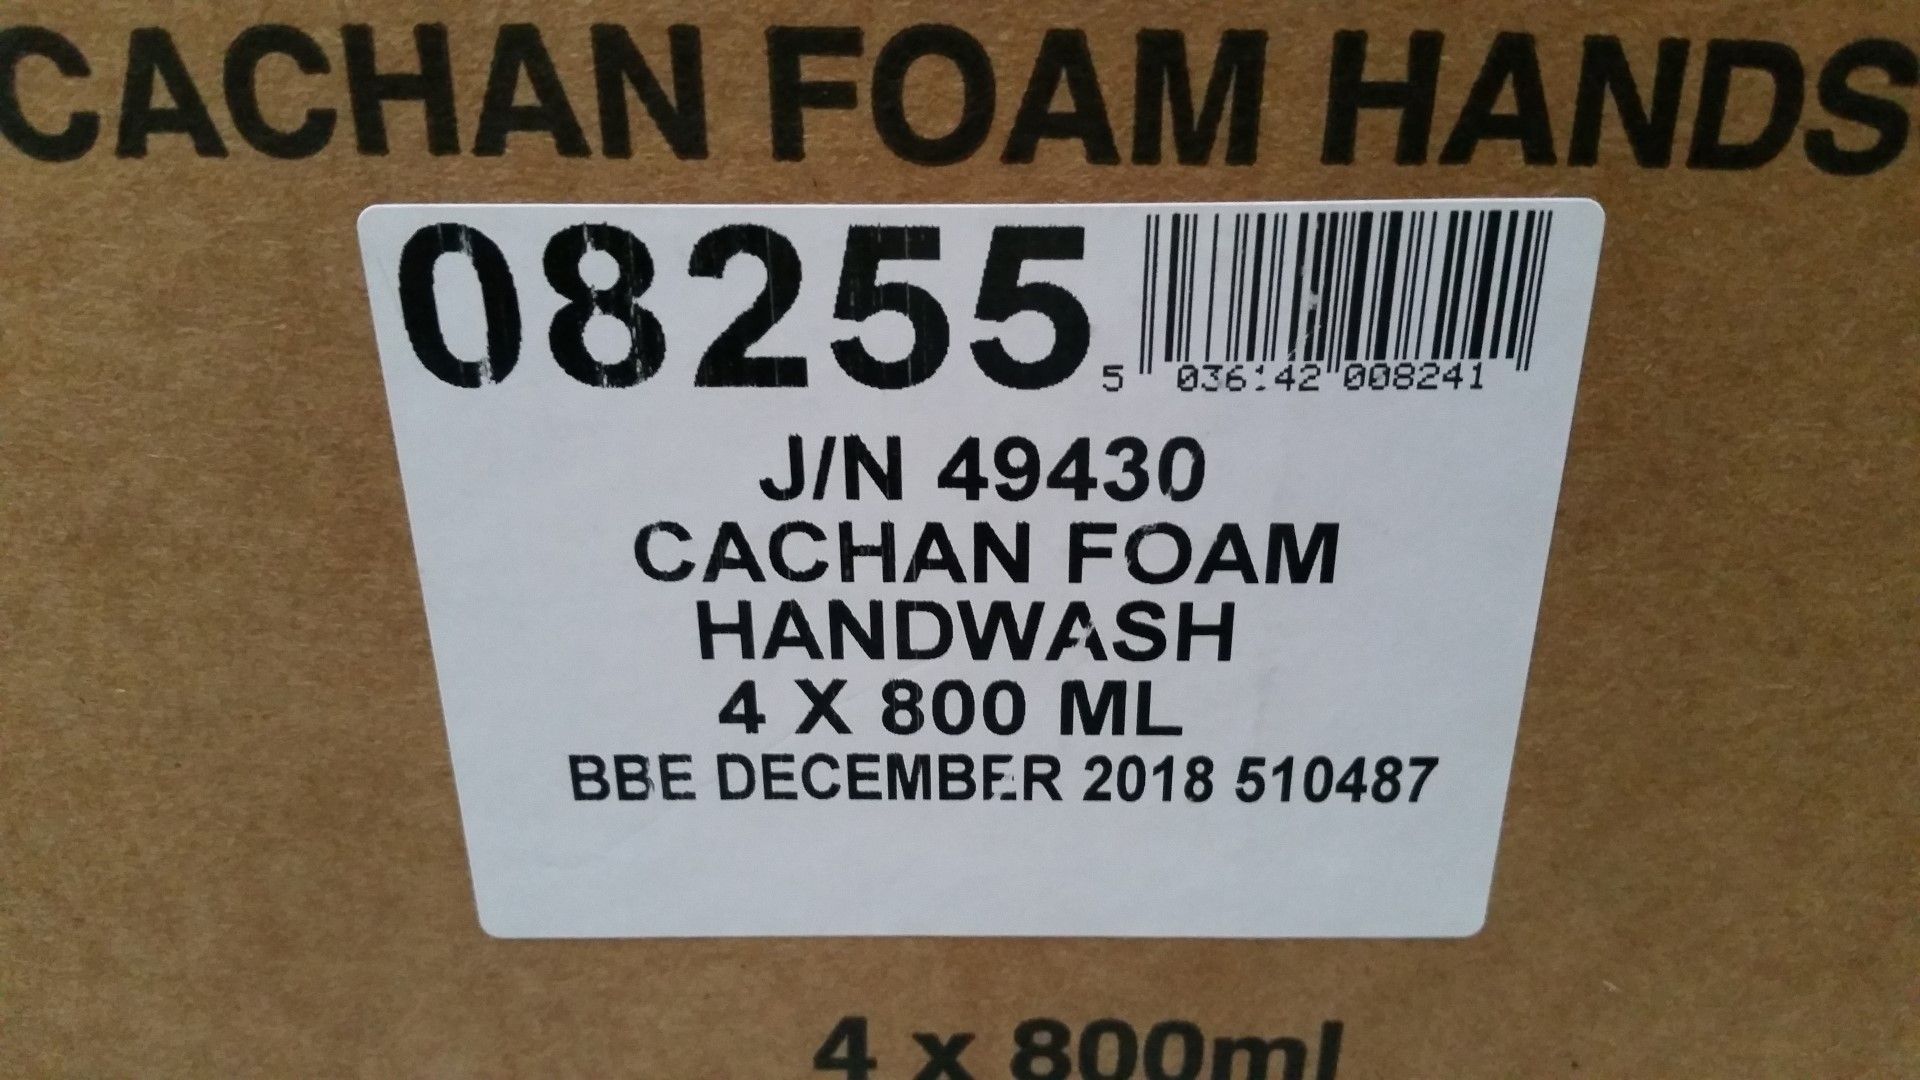 12 x Cachan Foam 800ml Handwash - Suitable For Foaming Dispnesers - Expiry December 2018 - New Boxed - Image 4 of 5